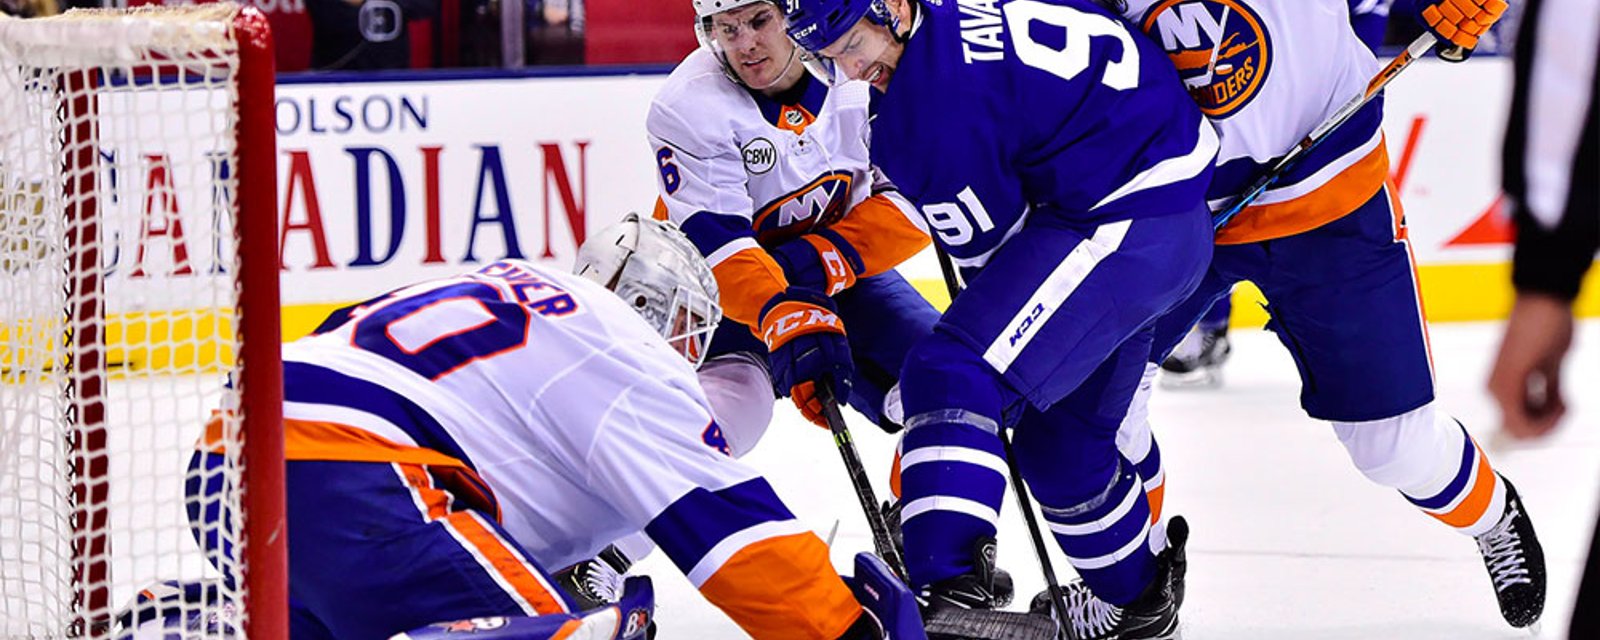 Leafs look to get back in the win column against the red-hot Islanders